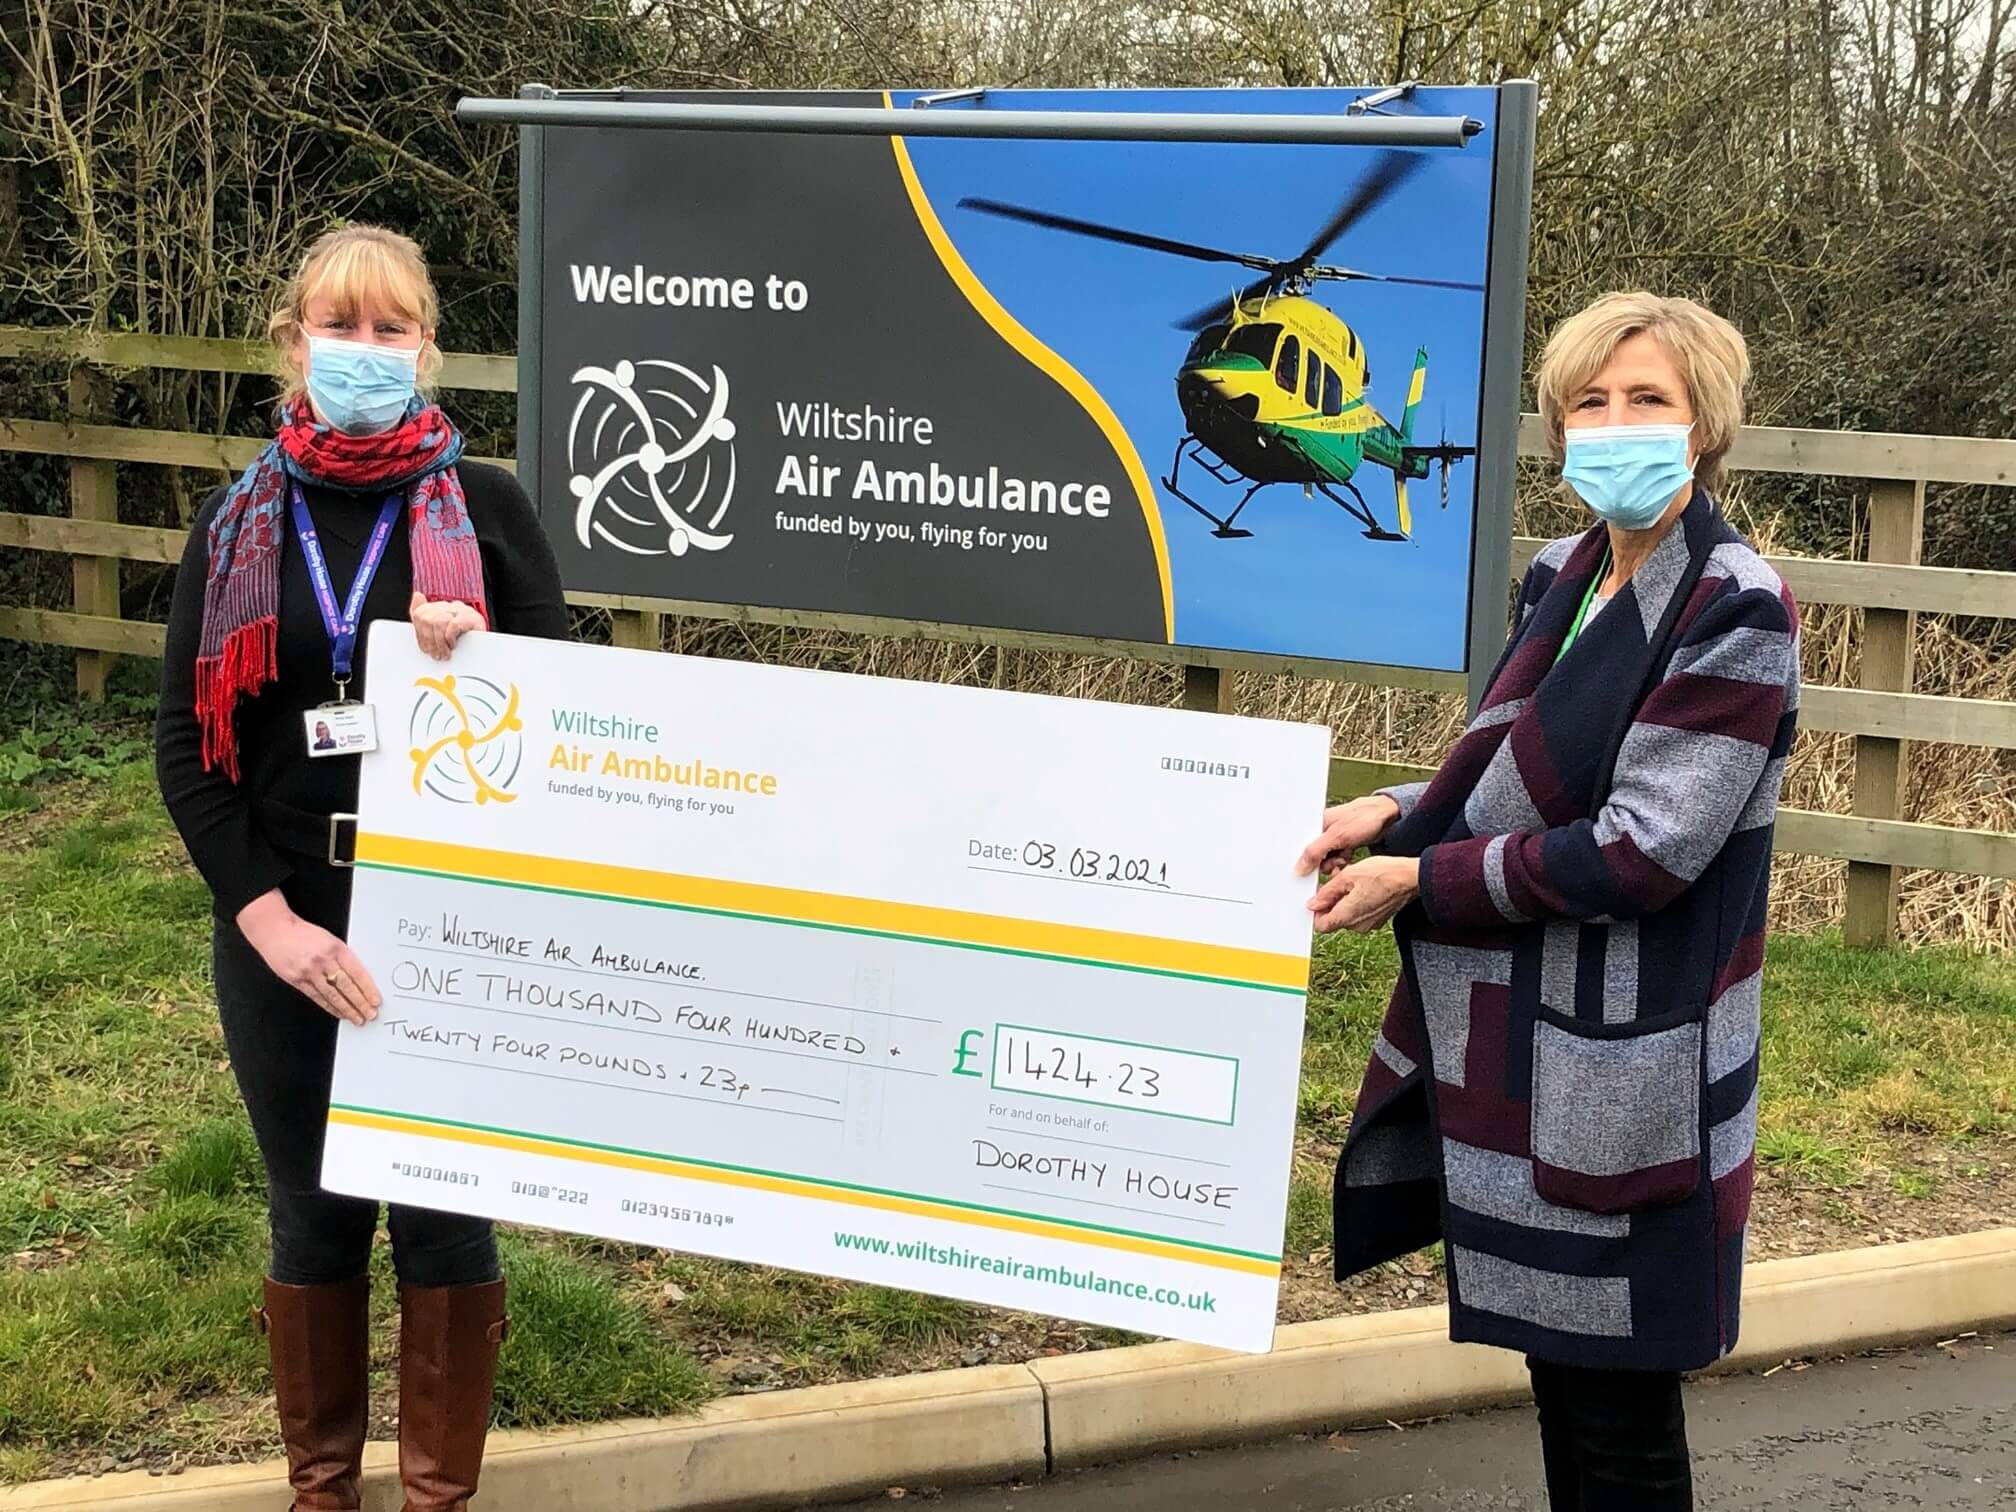 Emily with Wiltshire Air Ambulance's Cas presenting a cheque on behalf of Dorothy House for £1,424.23